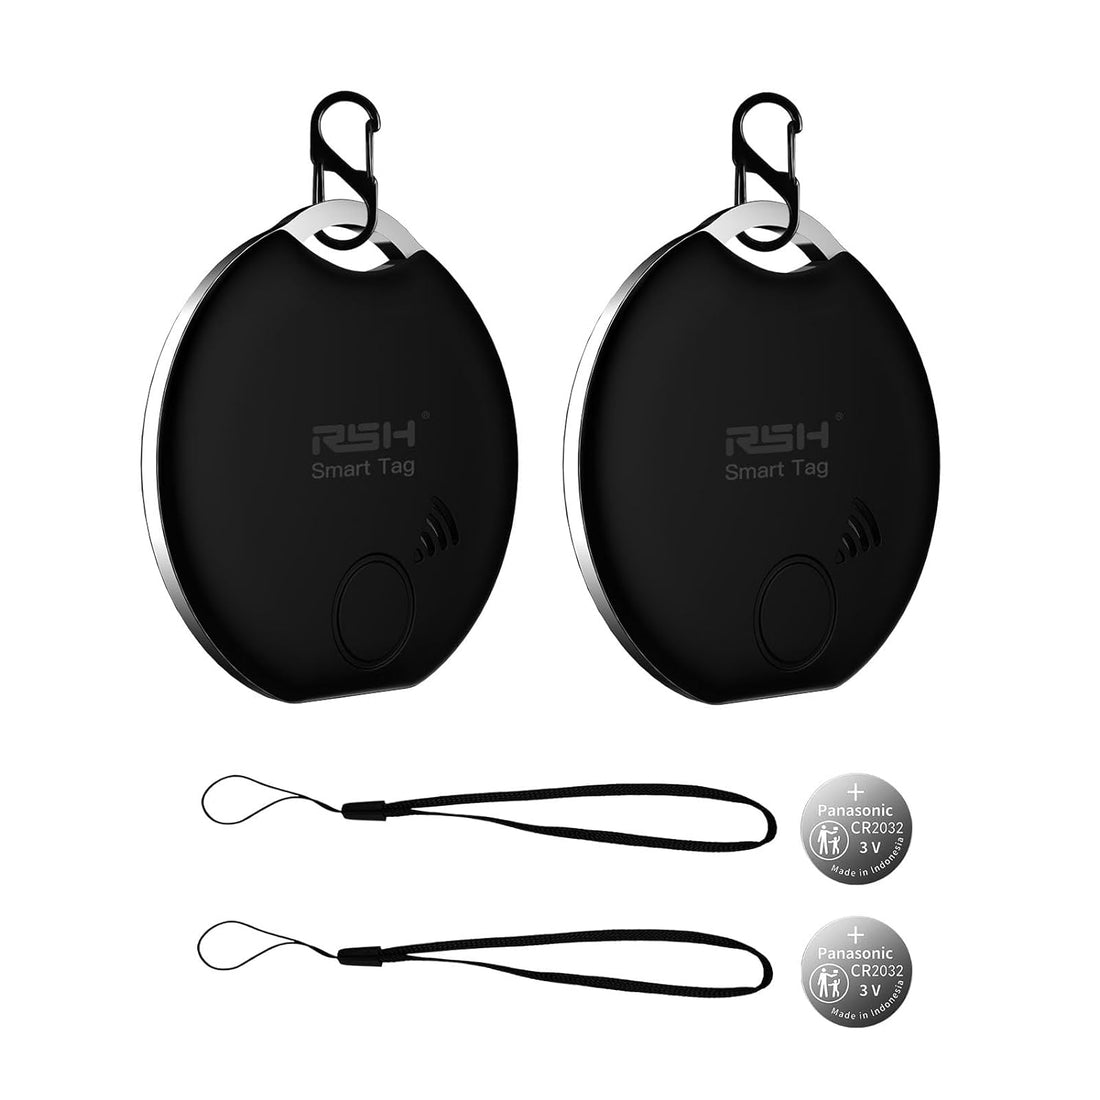 Key Finder Bluetooth Tracker Item Locator Tracking Device Compatible with iOS & Android Smart Tracker for Suitcase, Bag, Backpack, Wallet,with Replaceable Battery Smart App Item Finder (2 Pack)